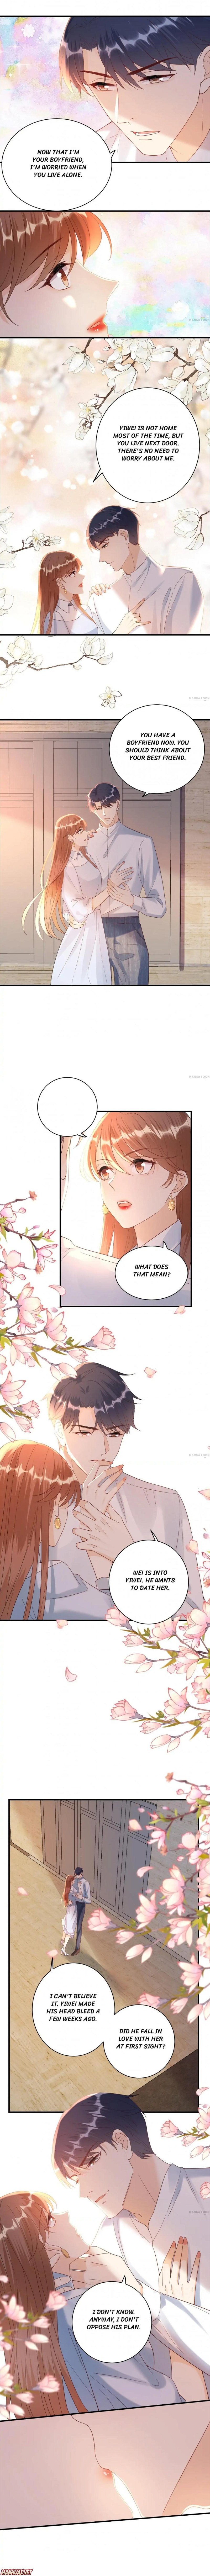 Breakup Loading 99% Chapter 52 - Page 1